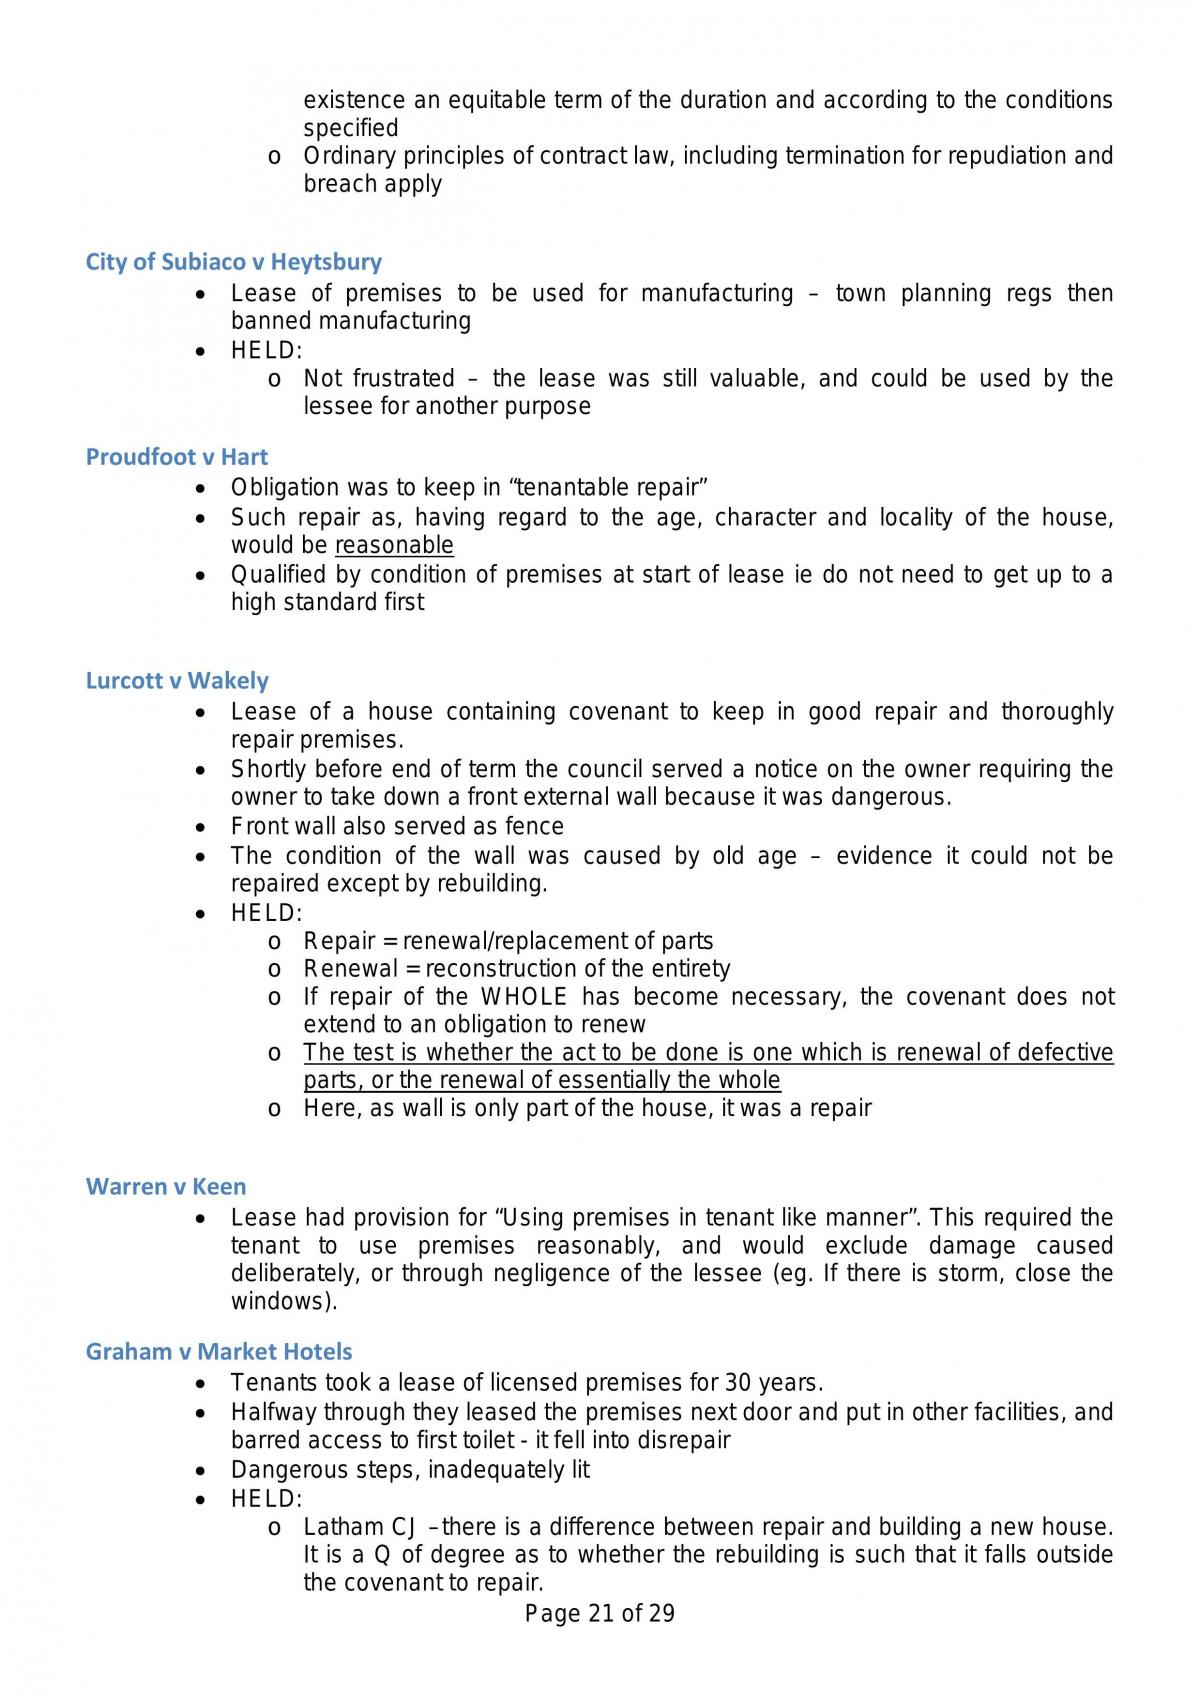 Real Property Case Summaries - Page 21